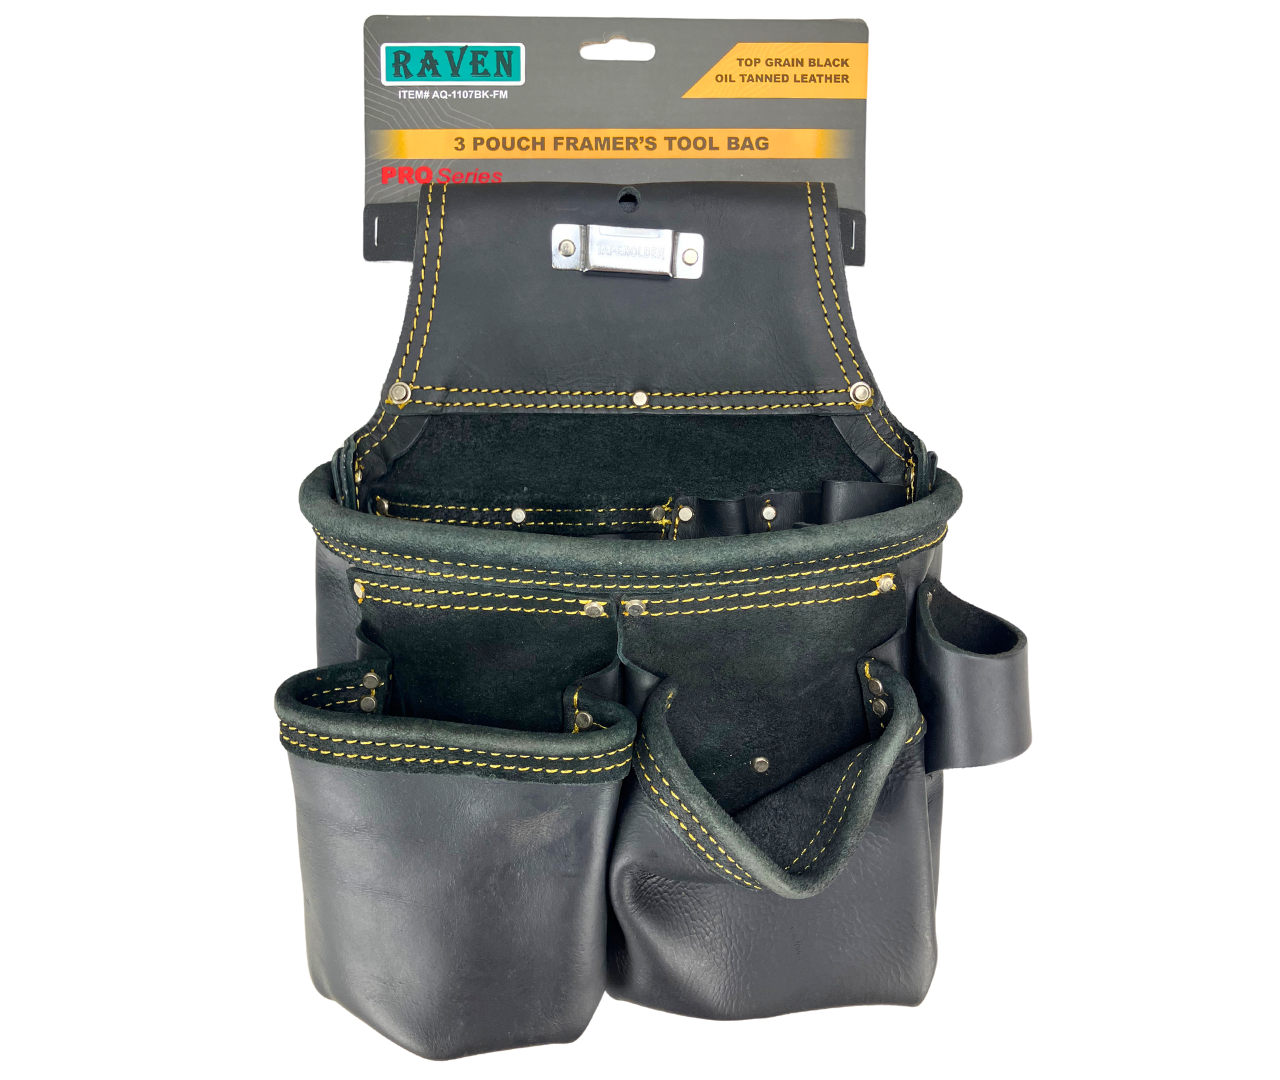 3 Pouch Framer's Professional Tool Bag, Top Grain Black Oil Tanned Leather || PRO Series